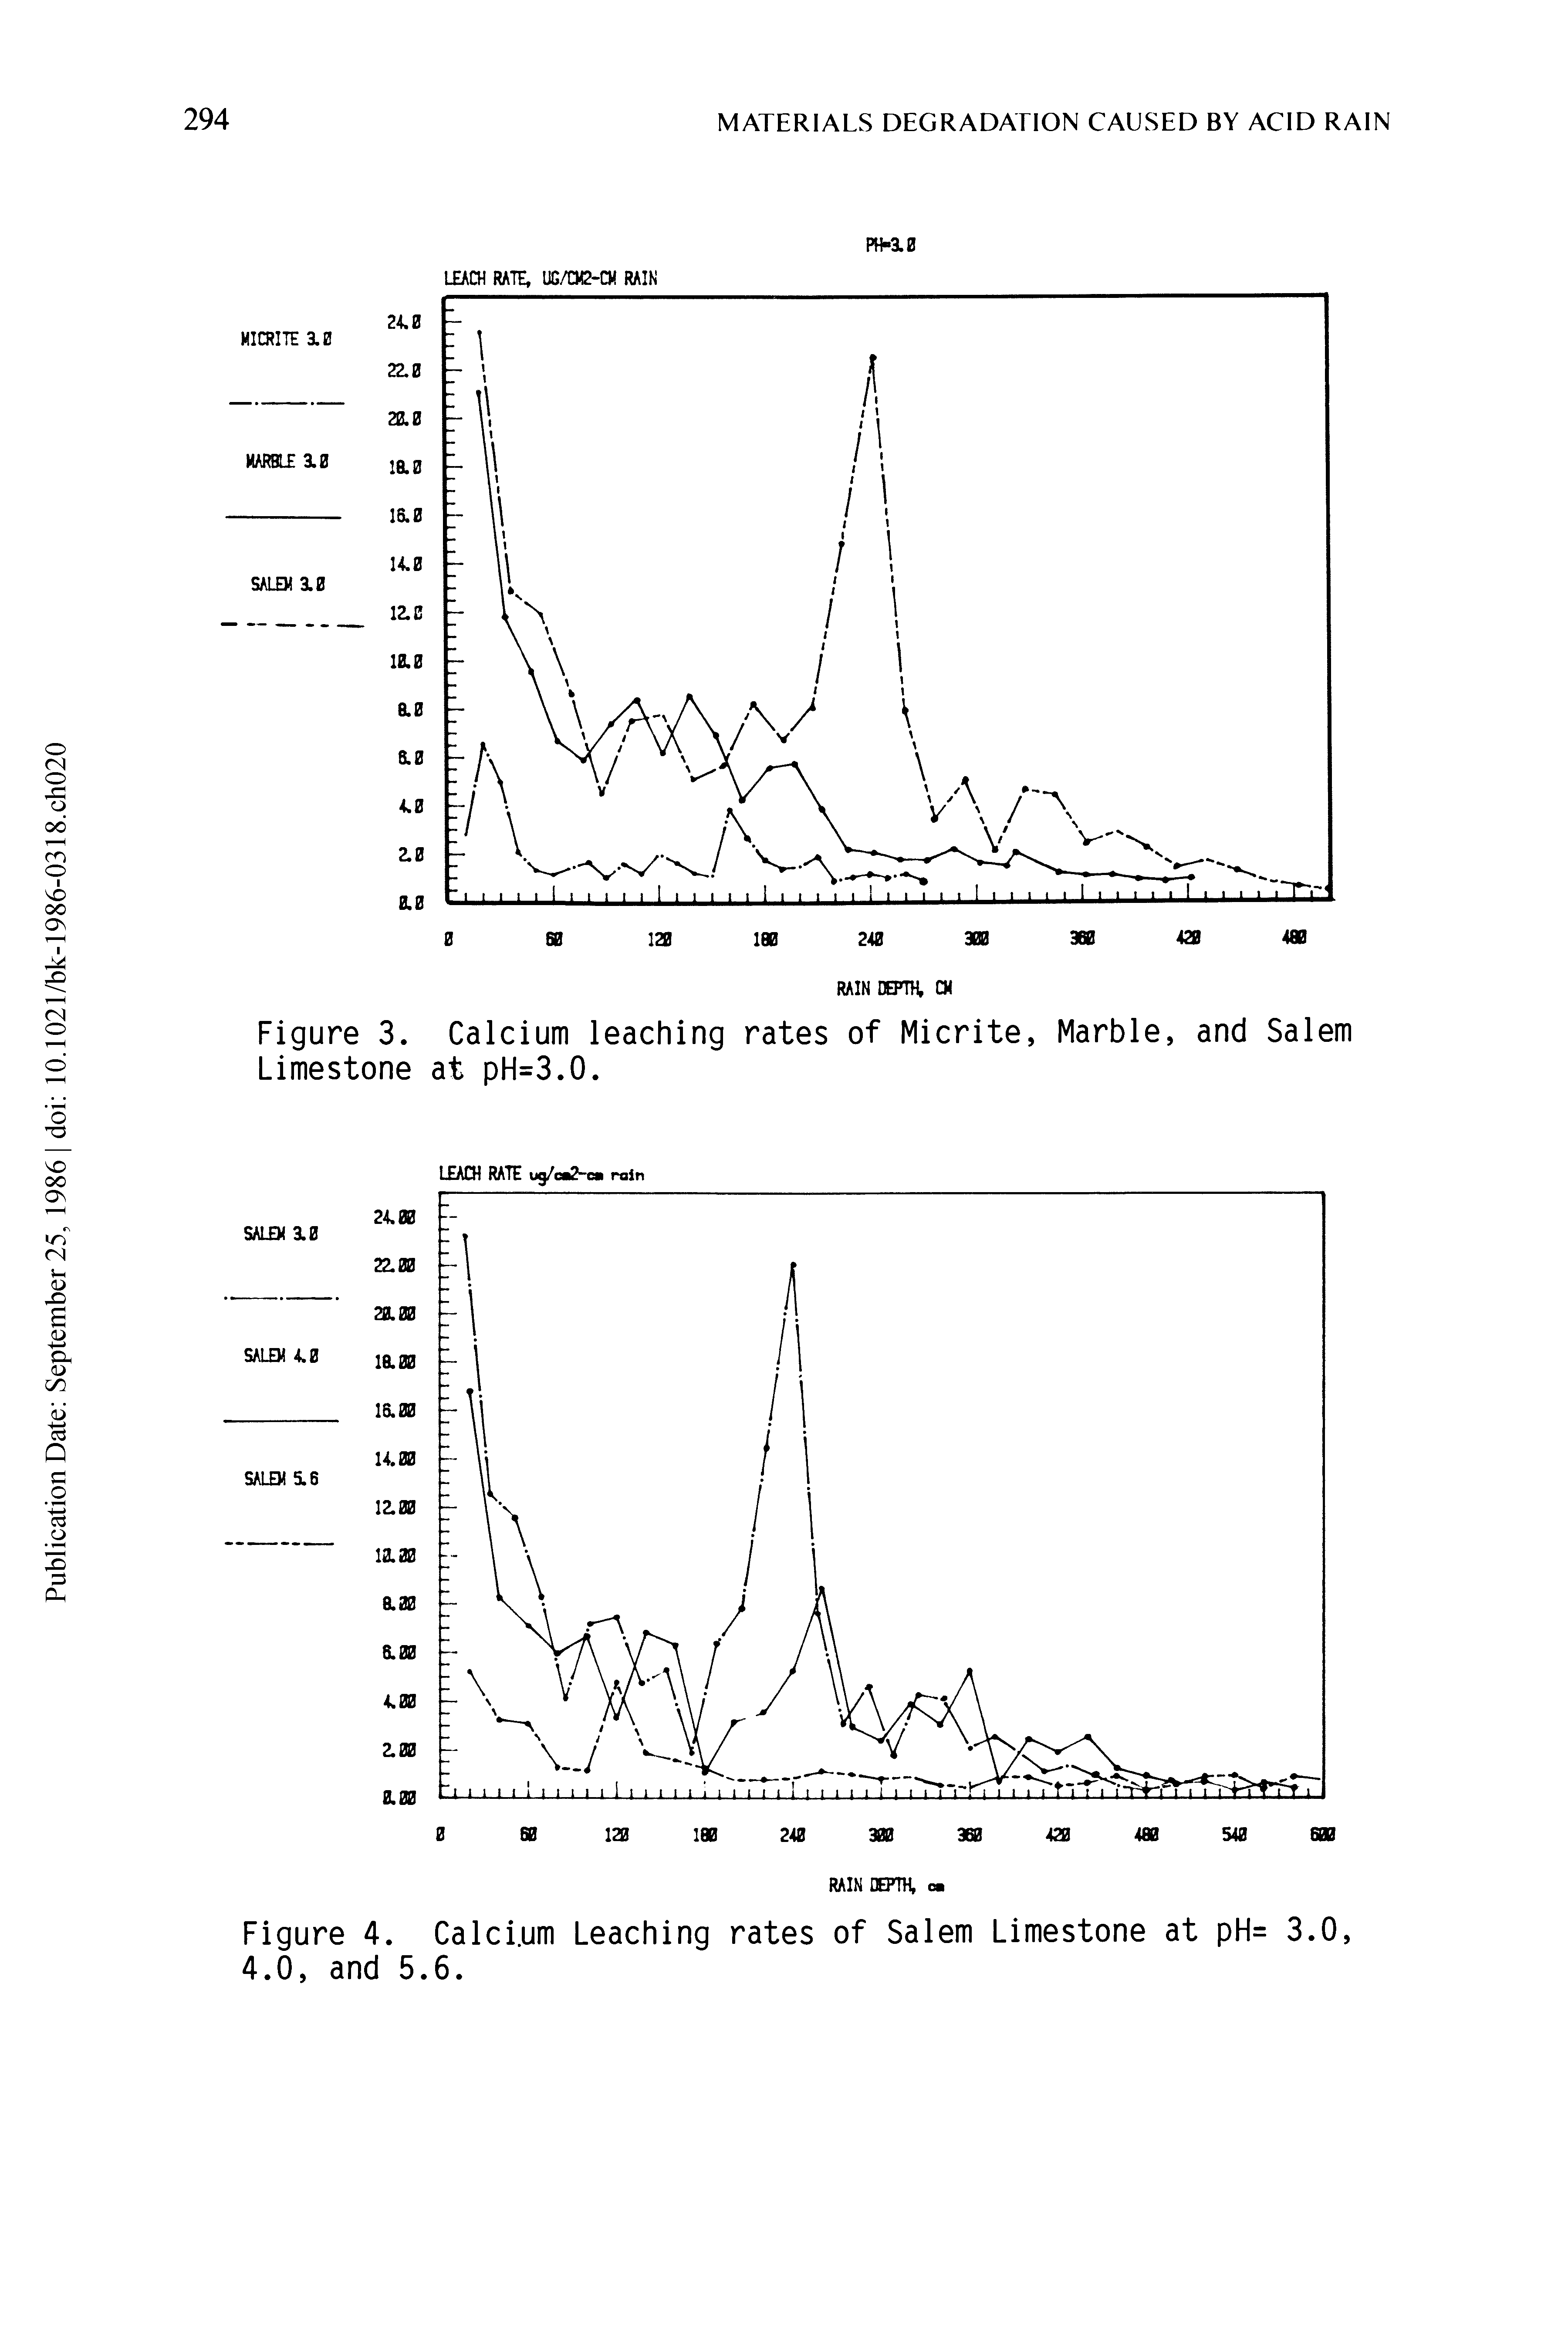 Figure 3. Calcium leaching rates of Micrite, Marble, and Salem Limestone at pH=3.0.